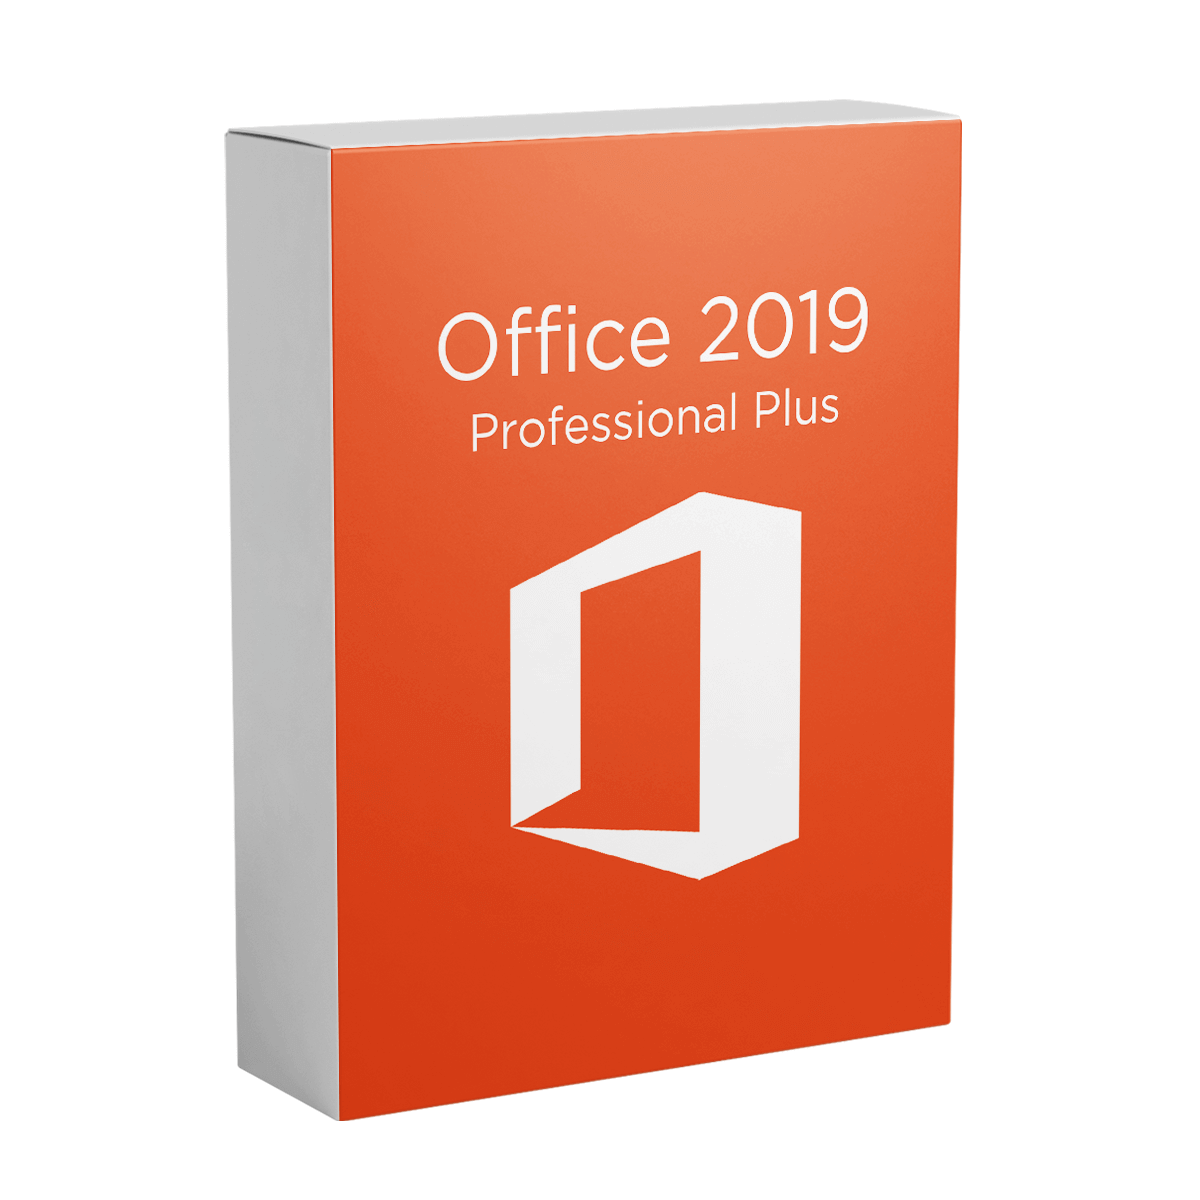 Office 2019 Professional Plus - Lifetime License for 1 PC